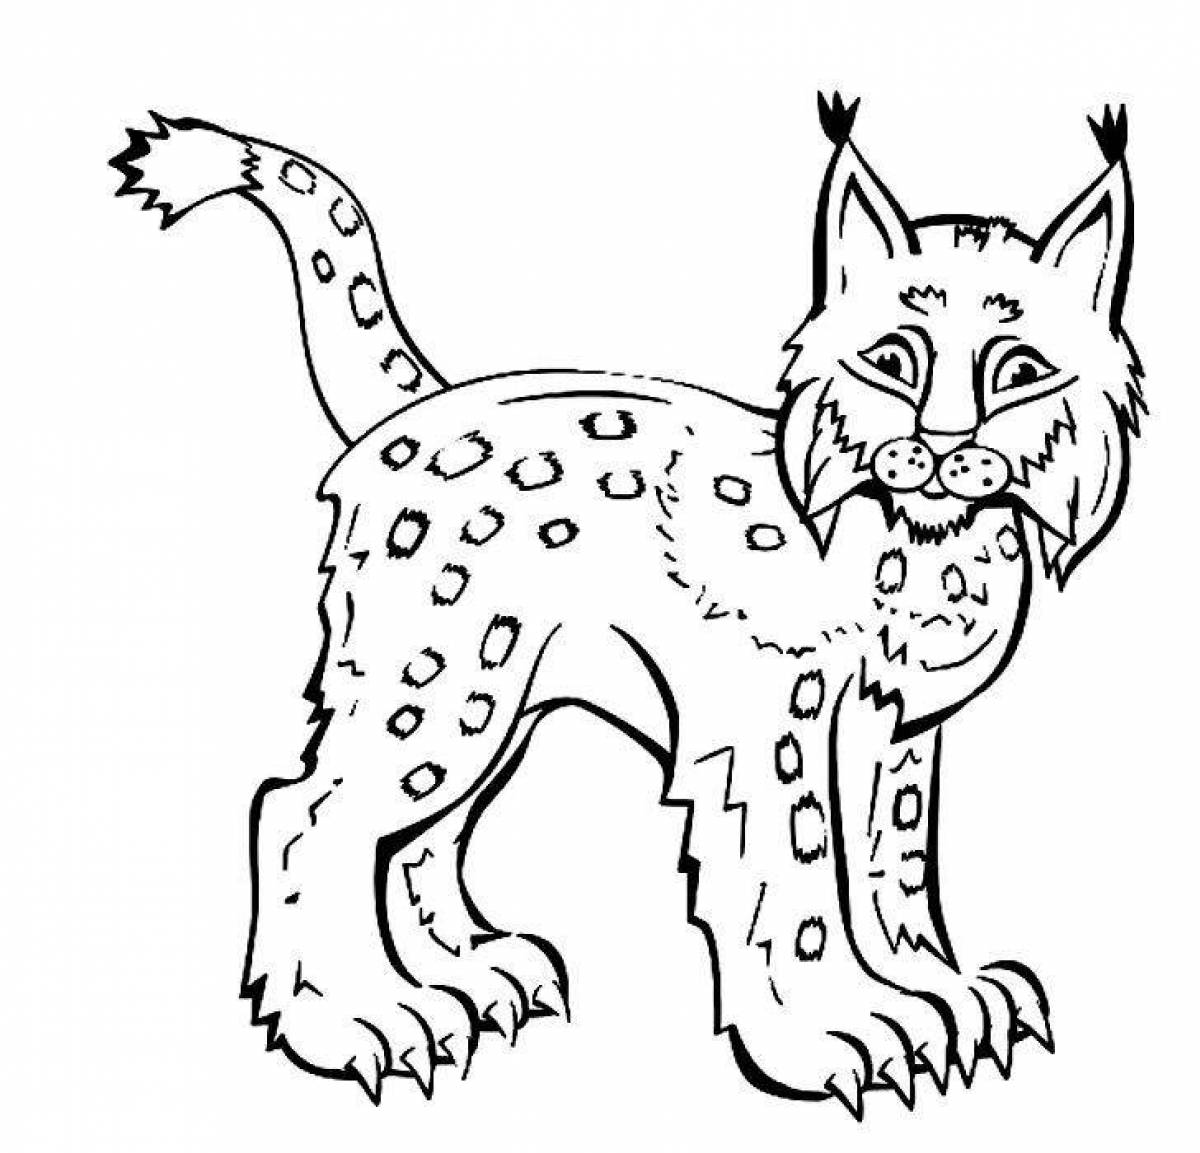 Coloring book dazzling lynx for beginners